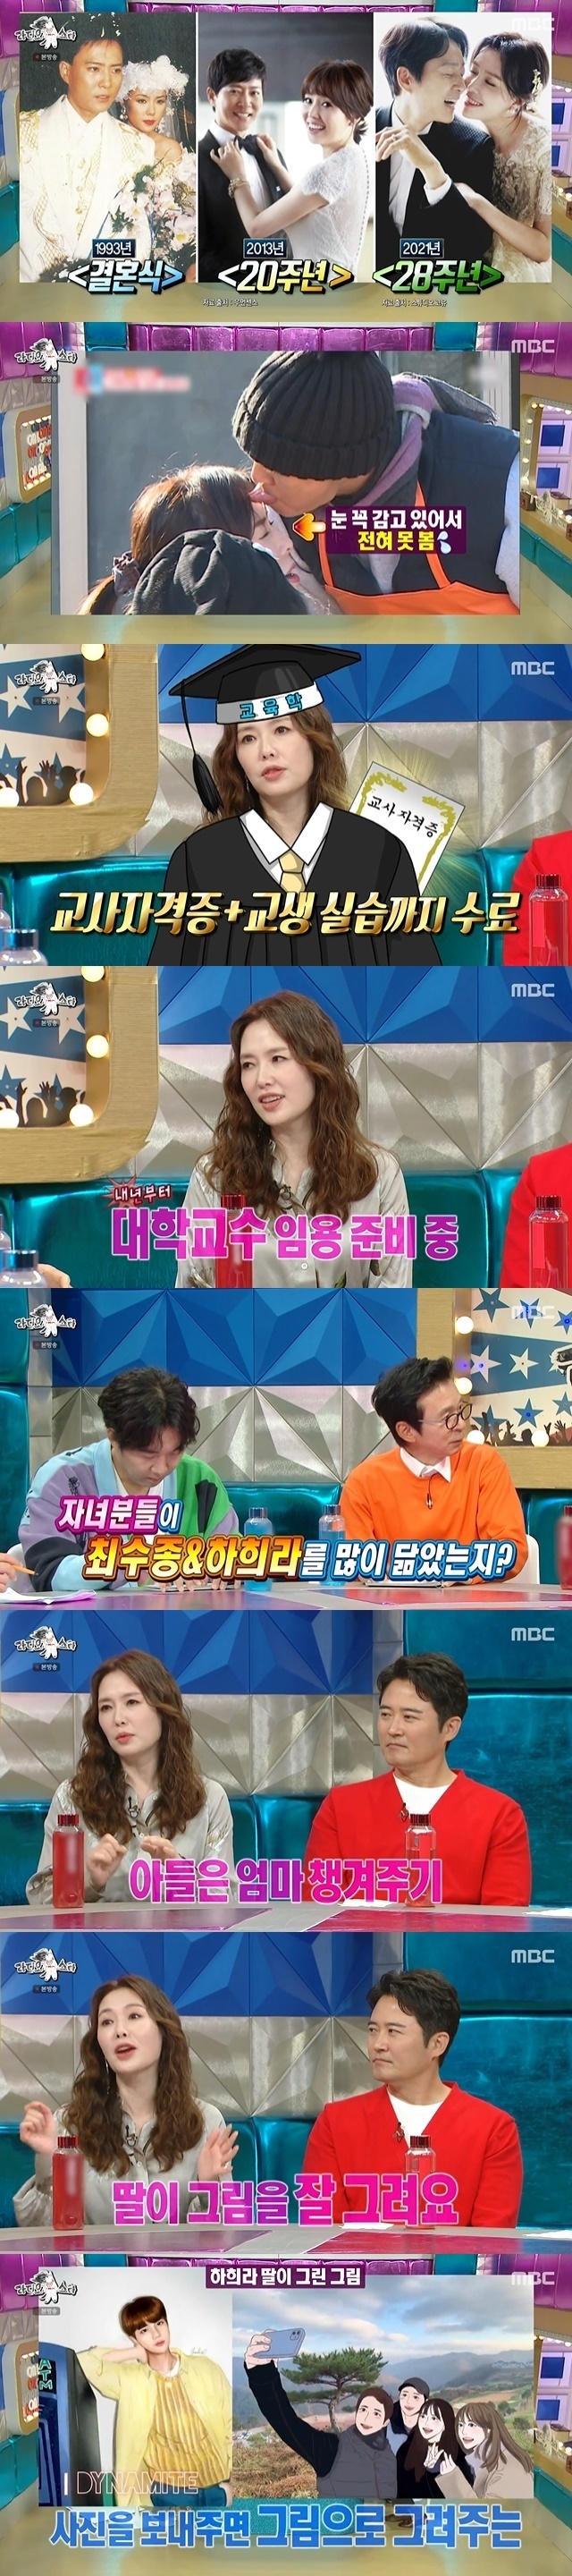 Actor Ha Hee-ra has honestly Confessions about her secret love with Choi Soo-jong, her childrens story, as well as her new future plans.In the 787th episode of MBCs entertainment Radio Star (hereinafter referred to as Radio Star), which aired on September 28, Ha Hee-ra, Im Ho, Kim Young-chul and Jung Gyu-woon appeared as guests.On this day, Im Ho revealed the reality of Choi Soo-jong and Ha Hee-ra who I witnessed directly at the filming site and the play scene.Choi Soo-jong texts and calls Ha Hee-ra every time on set, saying he loves her, while Ha Hee-ra doesnt even text.Do Kyung-wan, who played the daily hit MC on behalf of Yoo Se-yoon, who was confirmed to be a Corona 19 by the couple, sympathized with I think we are seeing a couple.Do Kyung-wan said, I am only tired. Confessions about this relationship, and Kim Gura, unlike Choi Soo-jong, said, Do Kyung-wan seems to have a plan.I love Jang Yoon-jung. Then, Ha Hee-ra should also write a letter, he said, representing Husband Choi Soo-jong, who is struggling like himself.I am changing a lot, Ha Hee-ra said. The character I play is a charming and emotional woman, so I thought she would like to express it.My love, he said, Isnt that what youre doing to me? (Plays partner) Im Ho? He hated it.The Ha Hee-ra Choi Soo-jong couple celebrated their 29th anniversary this year, and last year they made headlines for their 28th anniversary Remind Wedding.Ha Hee-ra said of this, I wanted to do it really and that I felt like I wouldnt be pretty if I wore (dresses) because I had a lot of body weight.So Ha Hee-ra said he wanted to have a remind wedding on his 30th anniversary, but Choi Soo-jong opposed it, saying he would not want to do it again.Eventually, the remind wedding produced more beautiful results than Ha Hee-ra thought.Ha Hee-ra said, The correction technology is developed, the makeup and hair are getting better, so the picture came out too well. Choi Soo-jong also said, Watch all the time.If you listen to me, the results are good.Ha Hee-ra explained that he looked like he was leading the picture, I felt good in a dress and beautifully decorating it.In the meantime, Ha Hee-ra replied, I think something is planned, when asked if Choi Soo-jong seems to be preparing for the event as next year is the 30th anniversary of marriage.However, she said, I actually like small things better, Choi Soo-jong said, When I did a huge event, I was hard, but I did not do it.Ha Hee-ra was a recaller of pre-marriage dating, and attracted attention by Confessions that Shin Ae-ra was a hidden helper.She said, Since I was a child, I watched MC, drama, and movie together. When I graduated from college and entered the love mode, I did something with Shin Ae-ra.(Choi Soo-jong) was watching MC, and it was the same recording day (Choi Soo-jong) came to the waiting room and called me, Mr. Shin Ae-ra, lets have a cup of coffee with me.Shin Ae-ra knew about our love affair and said, I told you to go with you.Ha Hee-ra has also told the fact that he sees the people around him because of Choi Soo-jongs two-much love.She said, Its okay when youre two, but when youre performing, youre usually looking at it. Im worried about how it looks.Ha Hee-ra, for example, said, When I dipped kimchi, something went into my eyes, but I did not see my eyes, but I did not know because I was closing my eyes.I was so surprised to see the broadcast, too, I did not know (even though my tongue touched).In addition, Ha Hee-ra was surprised to reveal an anecdote that she wore Hanbok while taking outdoor pictures while taking a daily historical drama that was difficult to learn in the past when she was studying and acting.Ha Hee-ra also said of her two children, who asked if they had a parent-like part, saying, The big child (son) is taking care of (mother).The military always wrote hand letters every week and said that if she took a vacation, she would do the dishes. She likes painting as a hobby, and she draws pictures well.I work part-time with it, and I am making pocket money. I send pictures and I do the painting. 